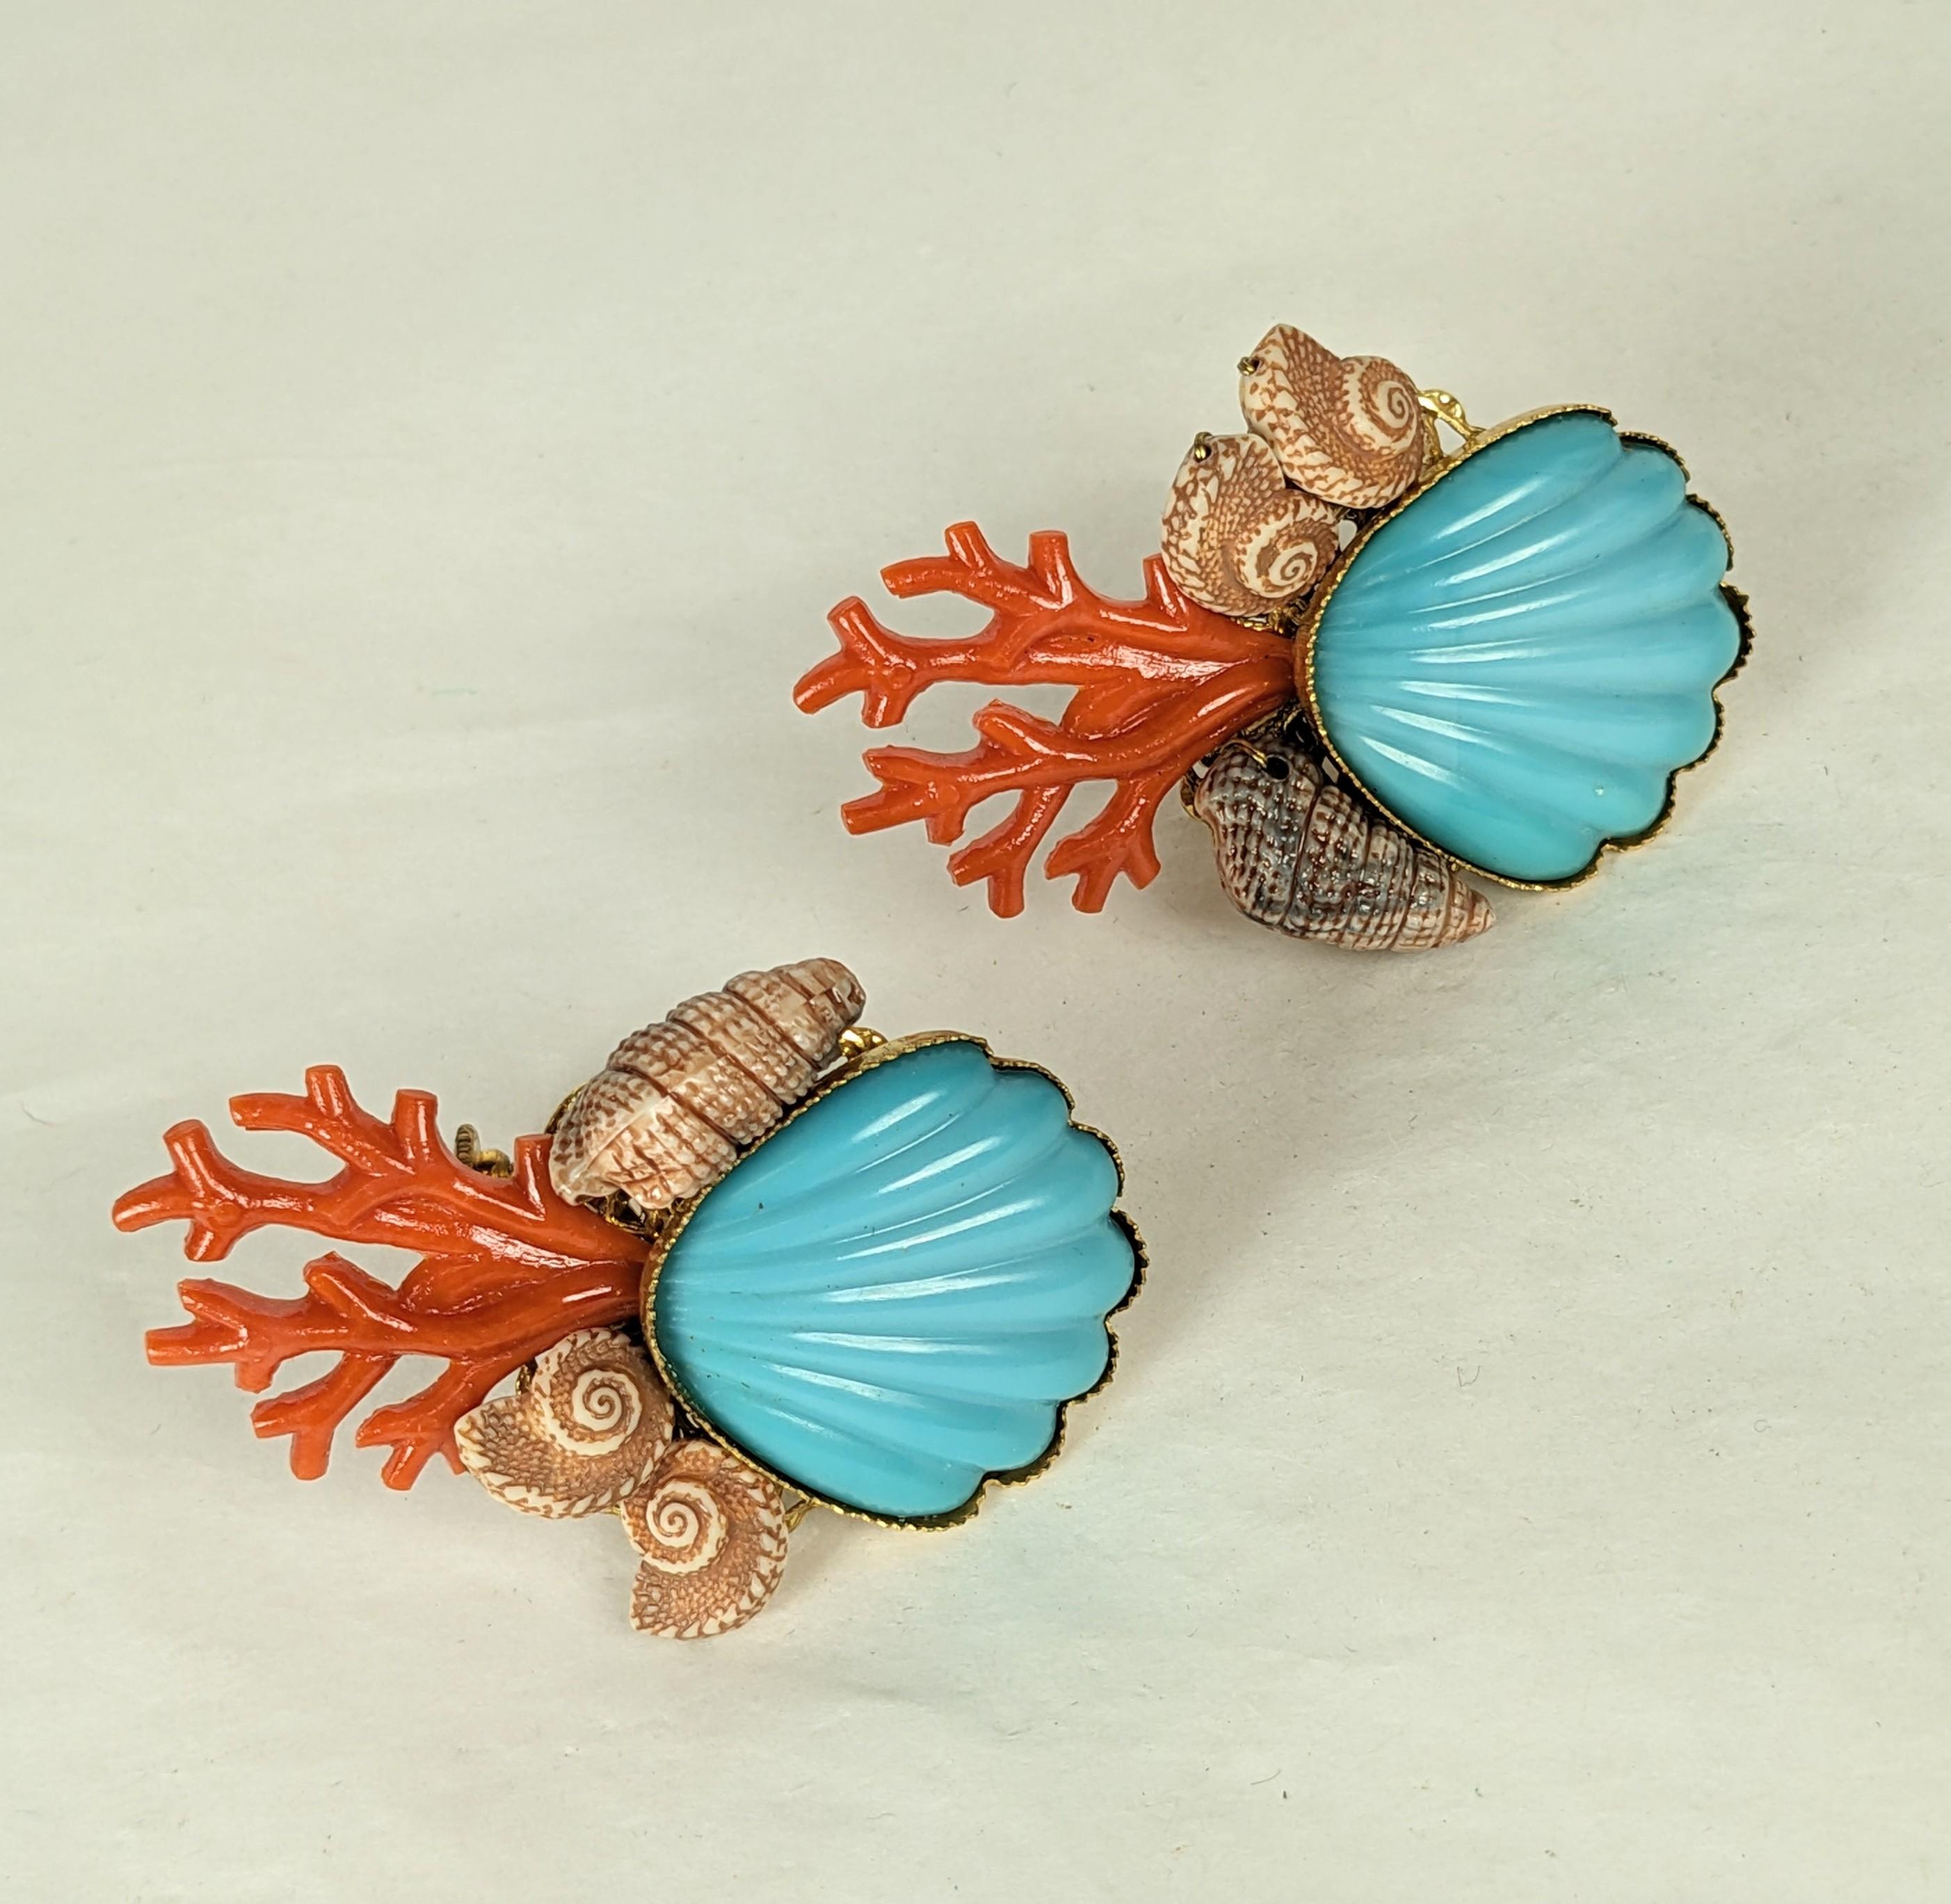 Women's Miriam Haskell Coral and Shell Motif Earrings For Sale